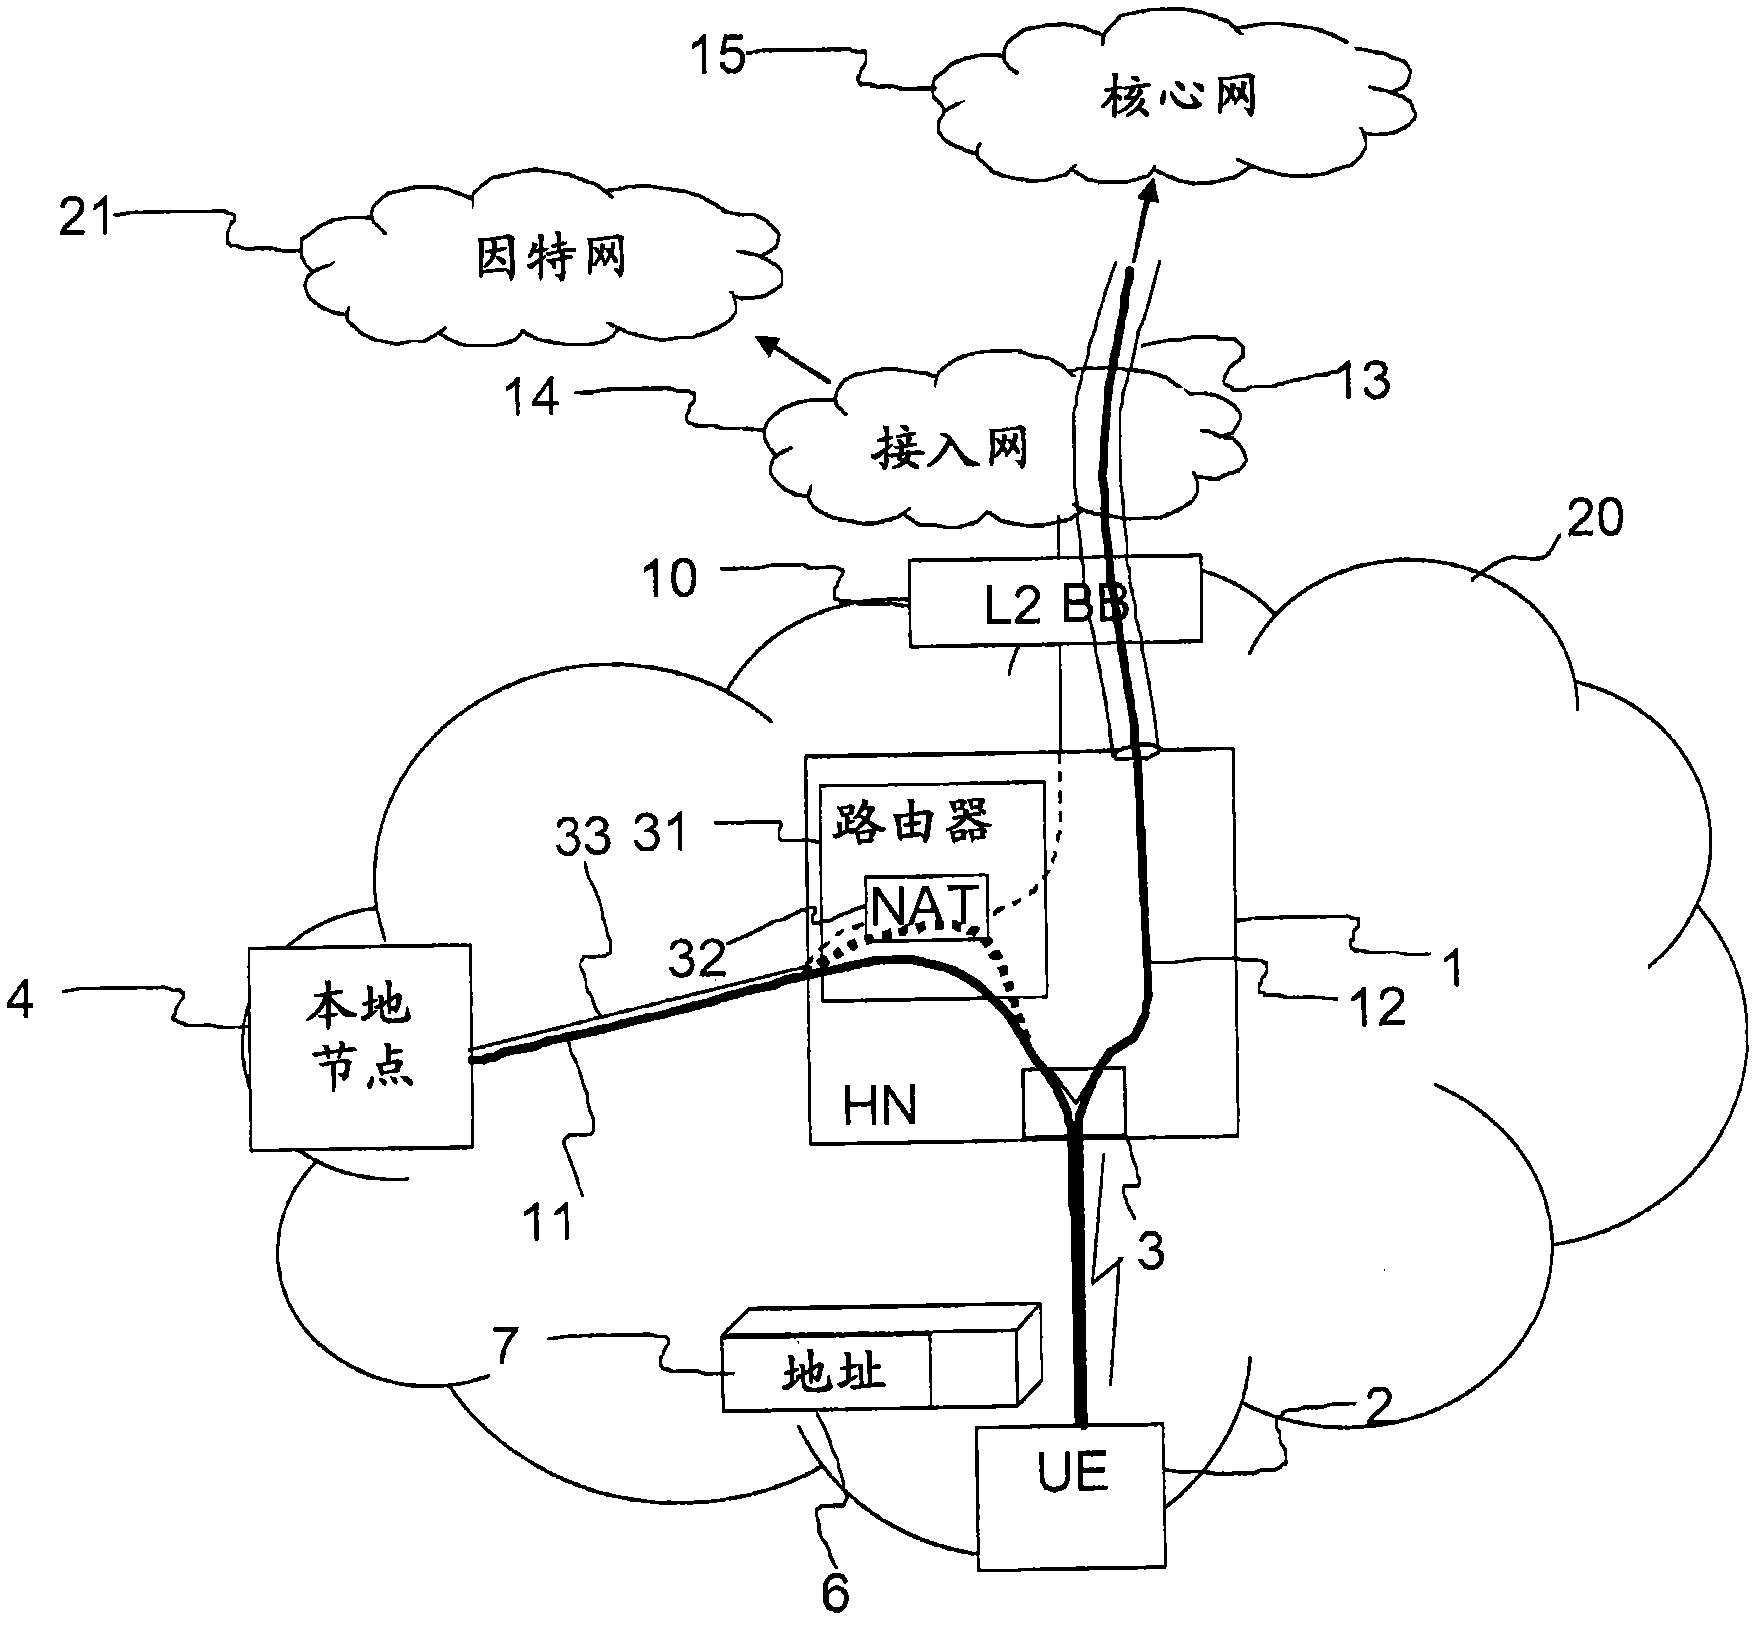 Method for enabling a home base station to choose between local and remote transportation of uplink data packets